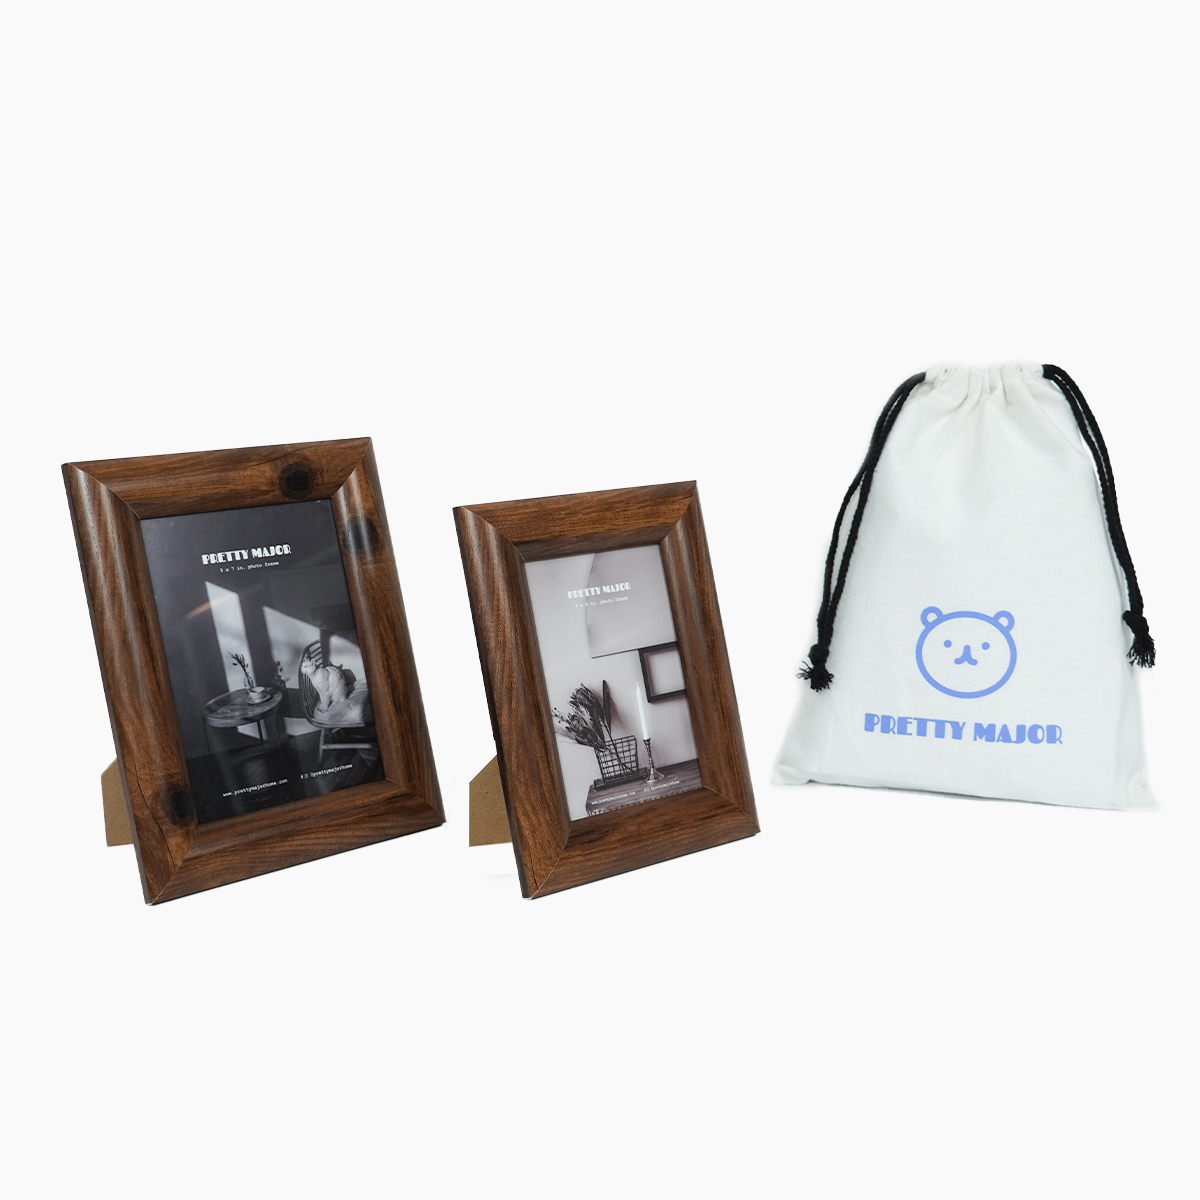 walnut wood thick border photo frames for 4r and 5r photos gift set with canvas bag